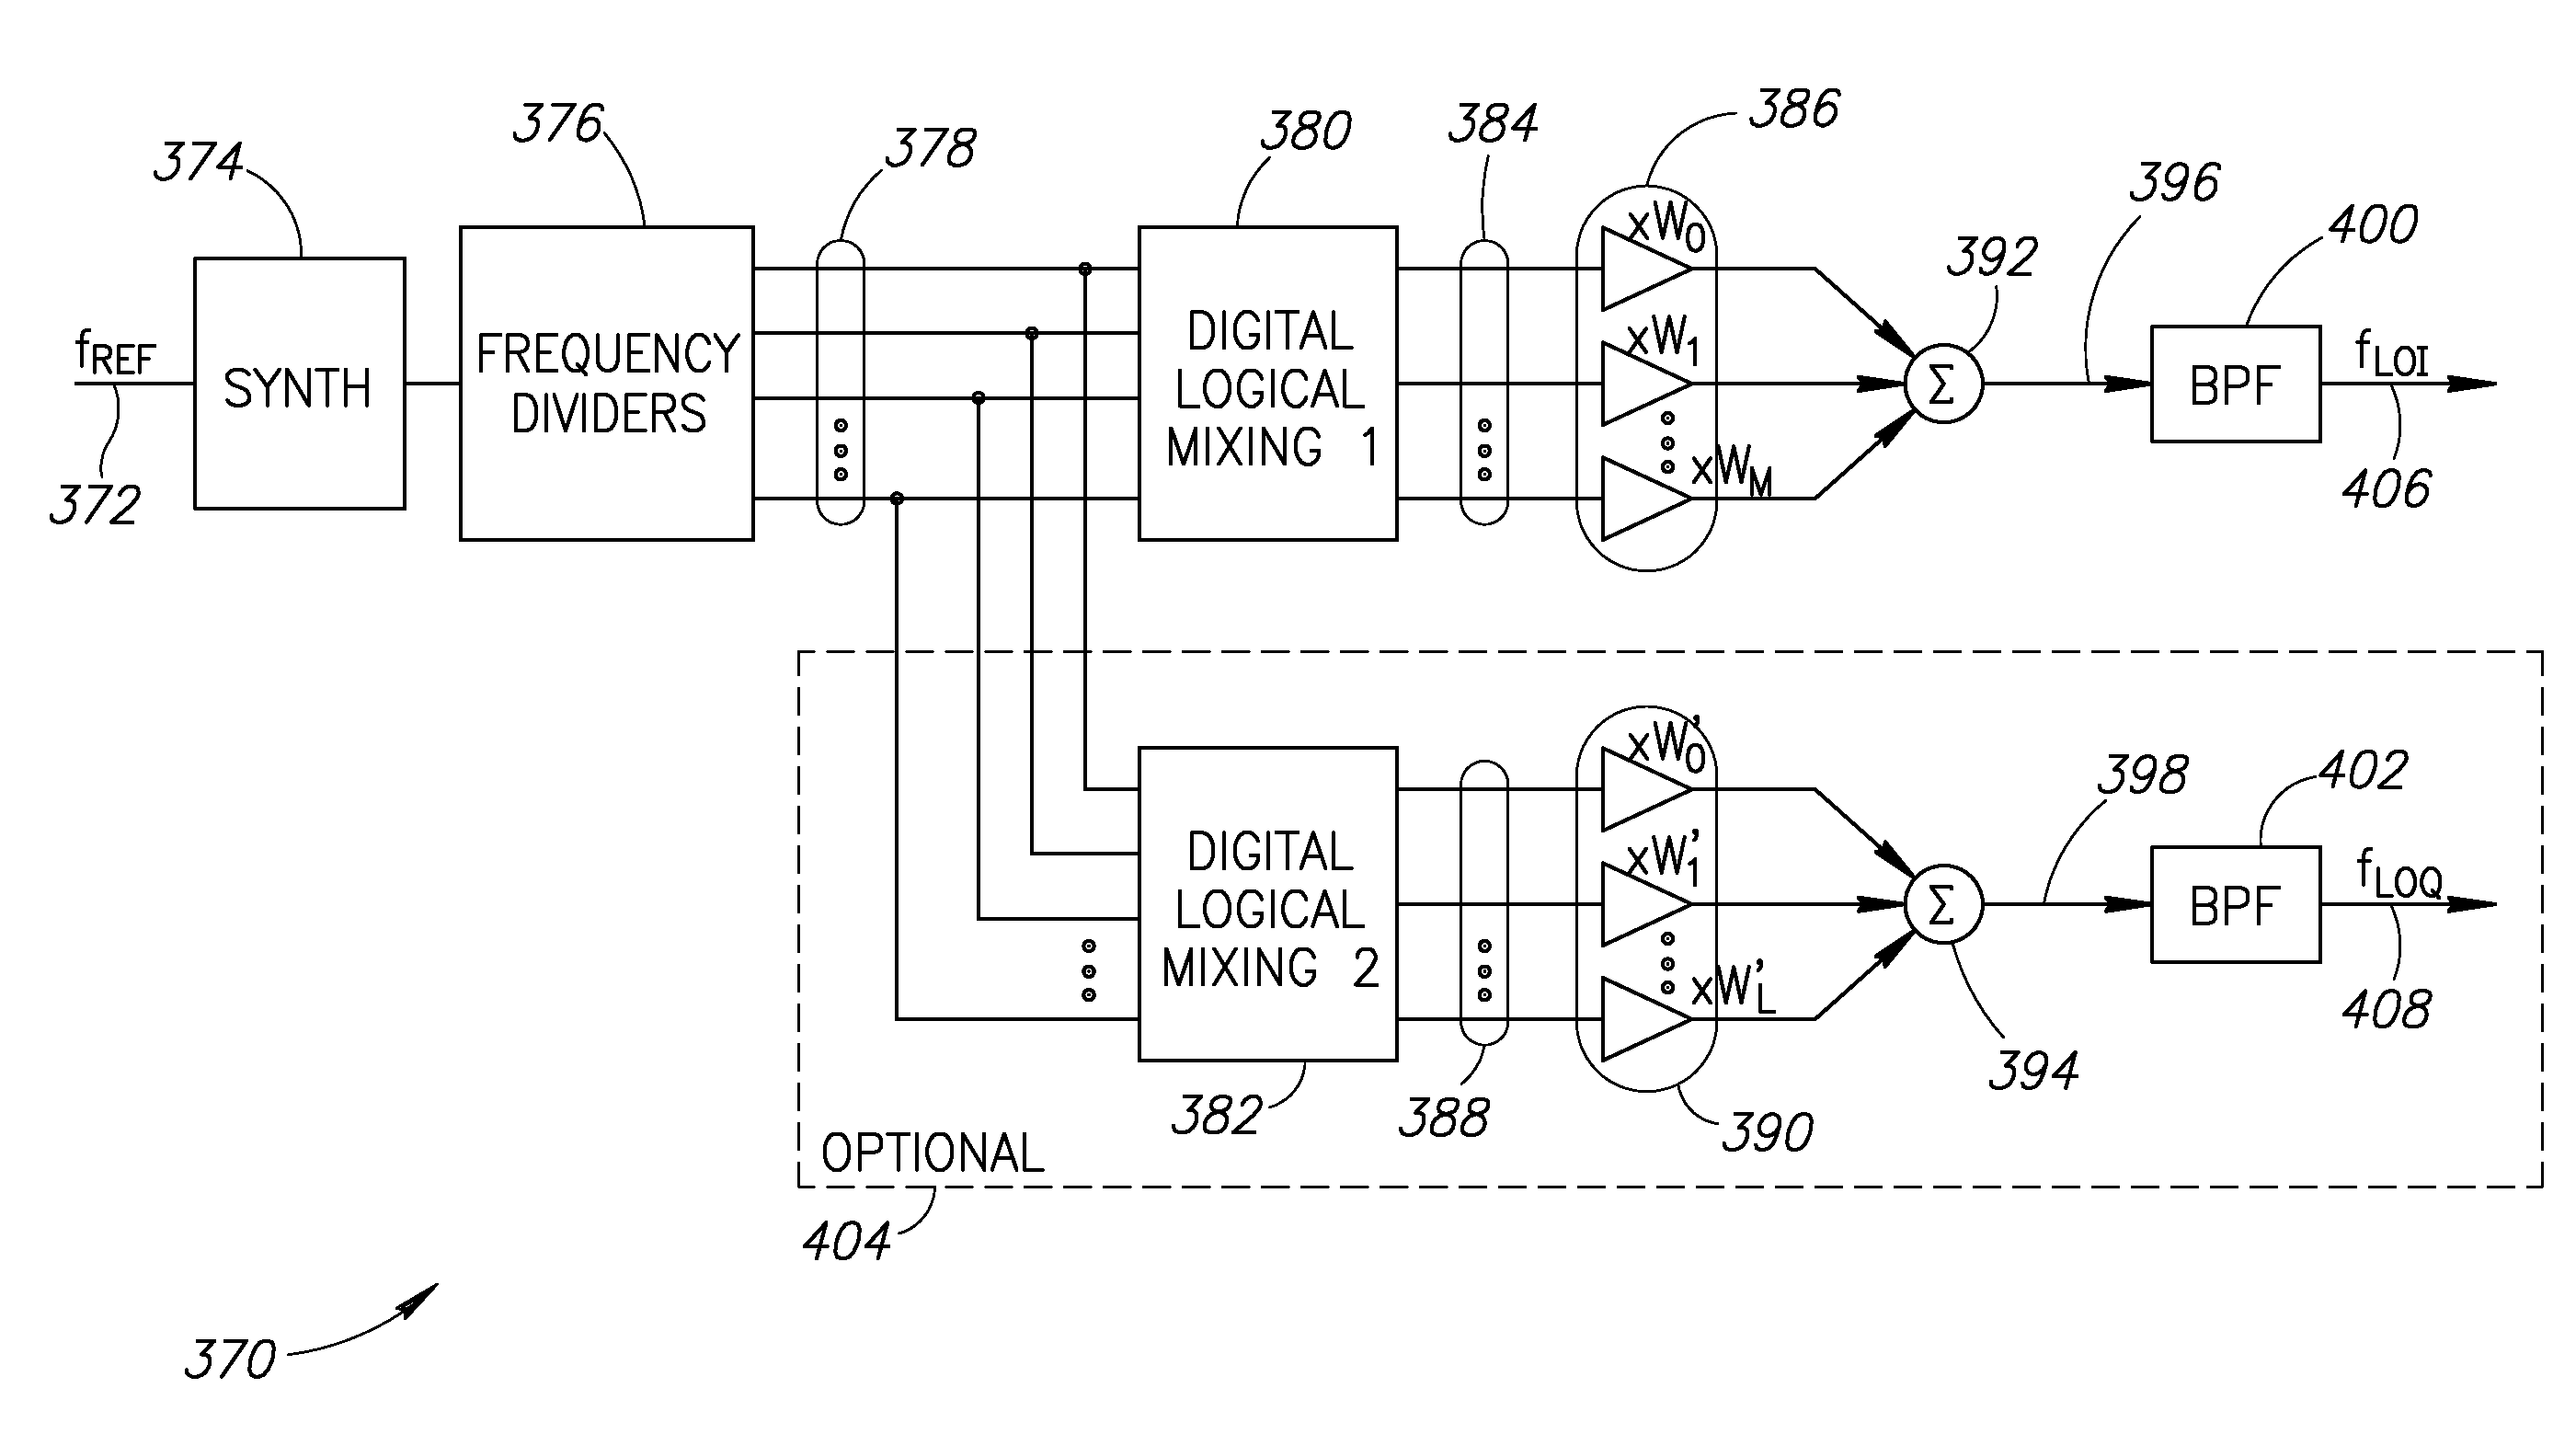 Local oscillator with non-harmonic ratio between oscillator and RF frequencies using pulse generation and selection